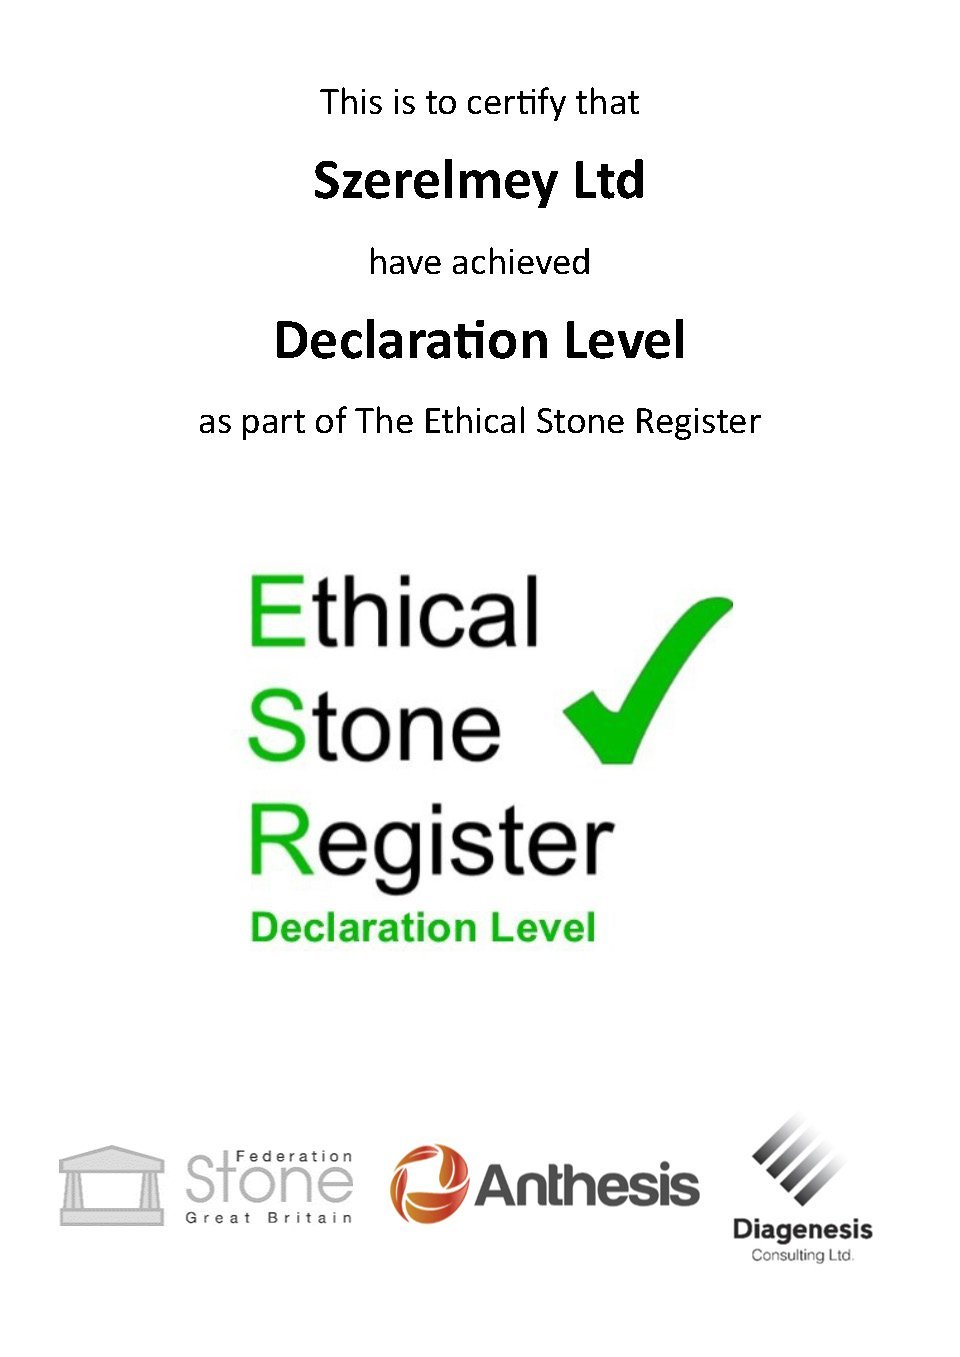 Szerelmey - First Contractor to join the Ethical Stone Register - Szerelmey